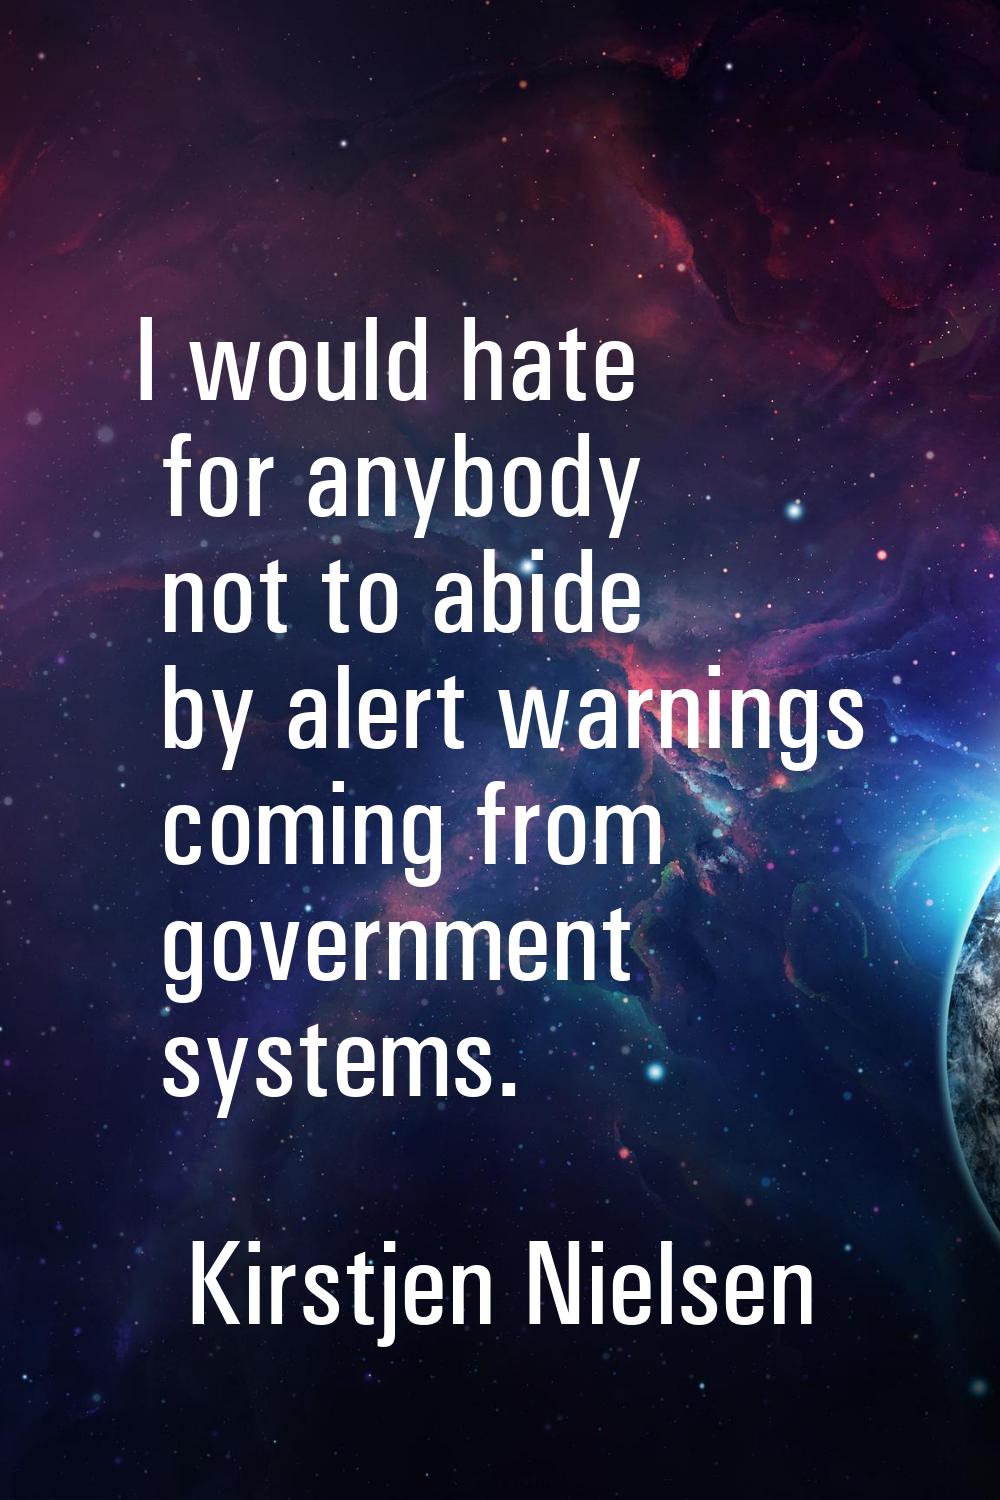 I would hate for anybody not to abide by alert warnings coming from government systems.